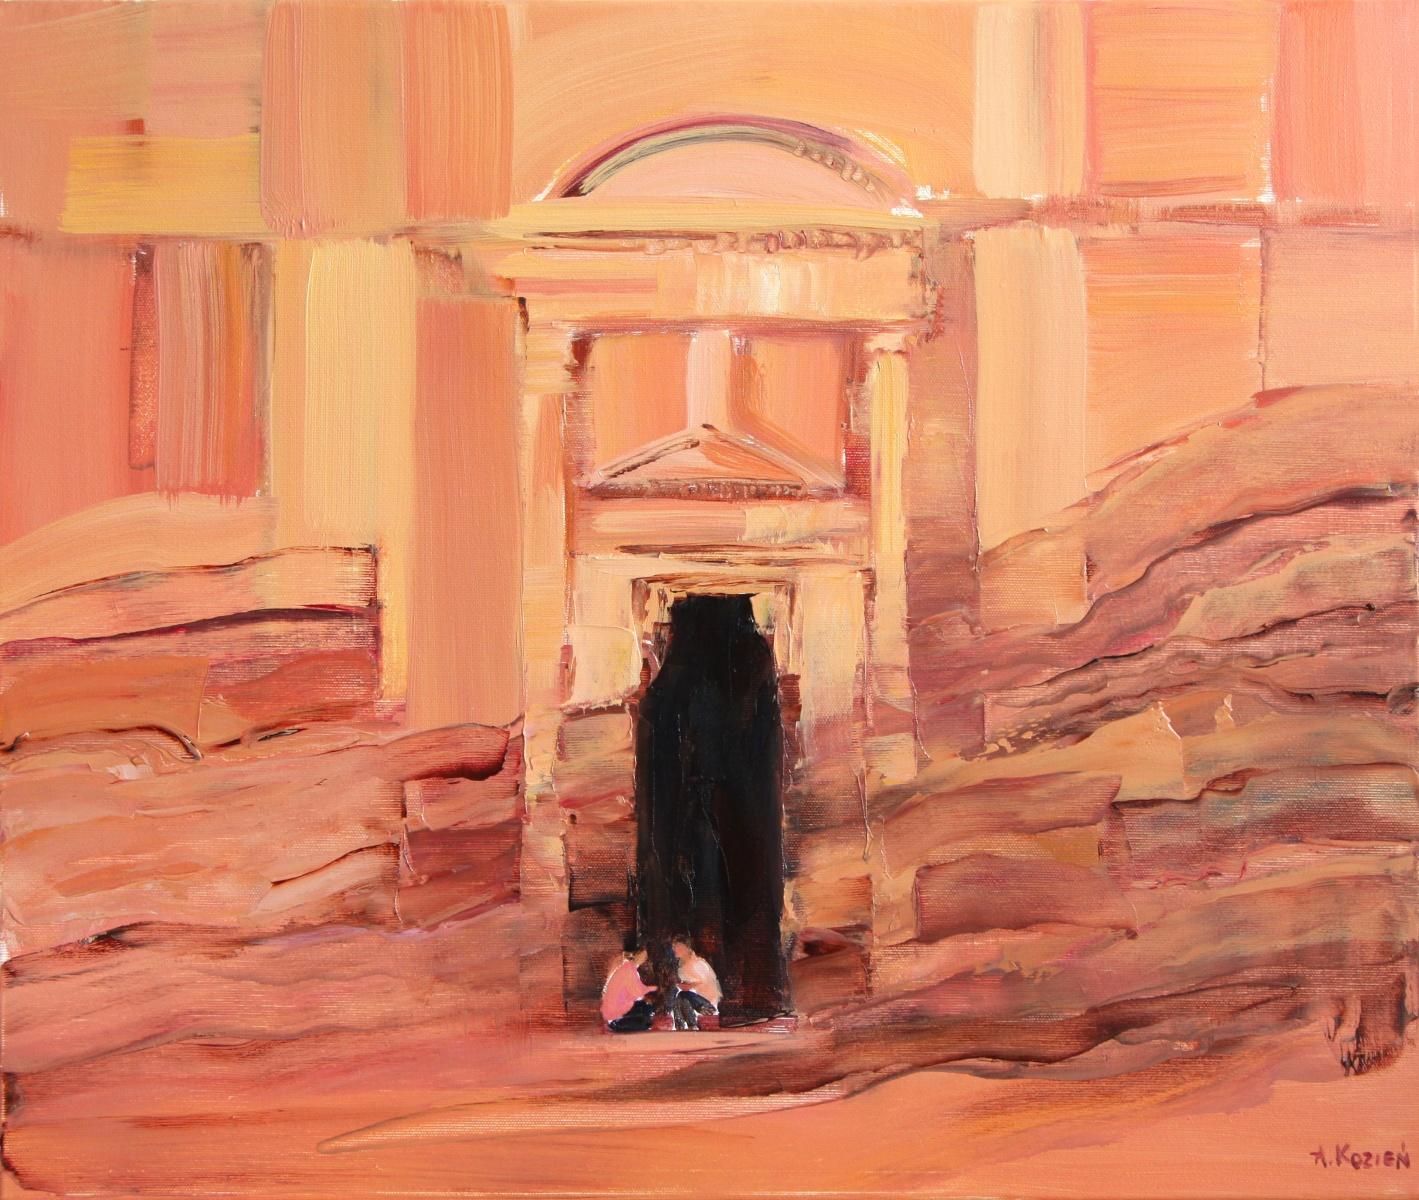 Agnieszka Kozień Figurative Painting - Palace in the Desert- Oil on canvas, Painting, Petra Contemporary Polish Artist